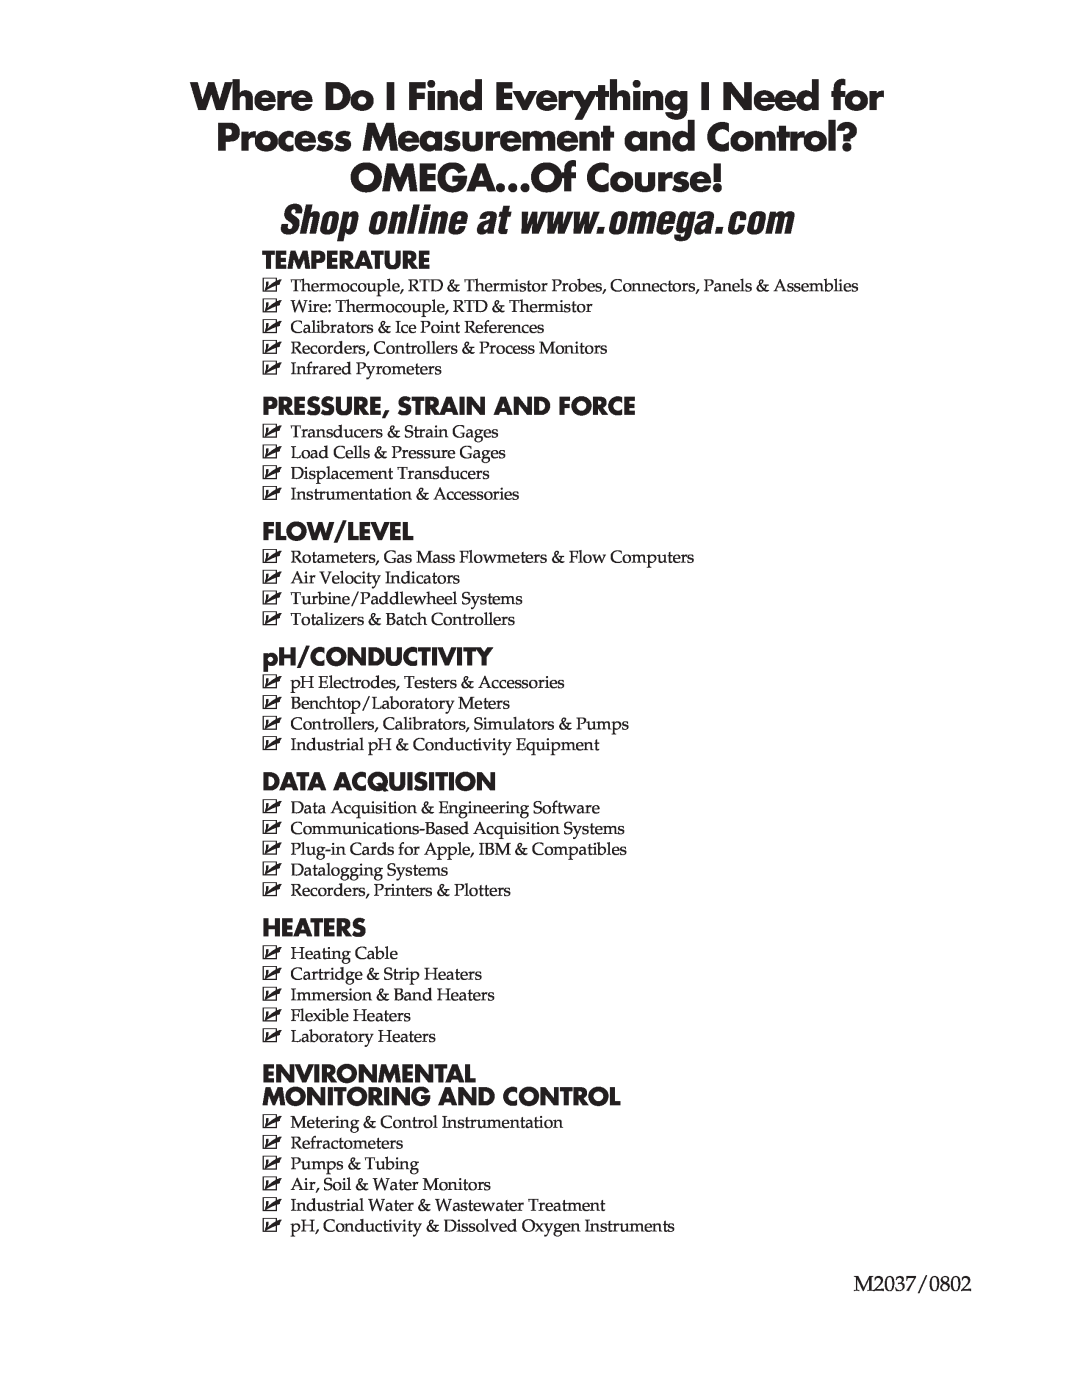 Omega TT300 manual OMEGA…Of Course, Temperature, Pressure, Strain And Force, Flow/Level, pH/CONDUCTIVITY, Data Acquisition 